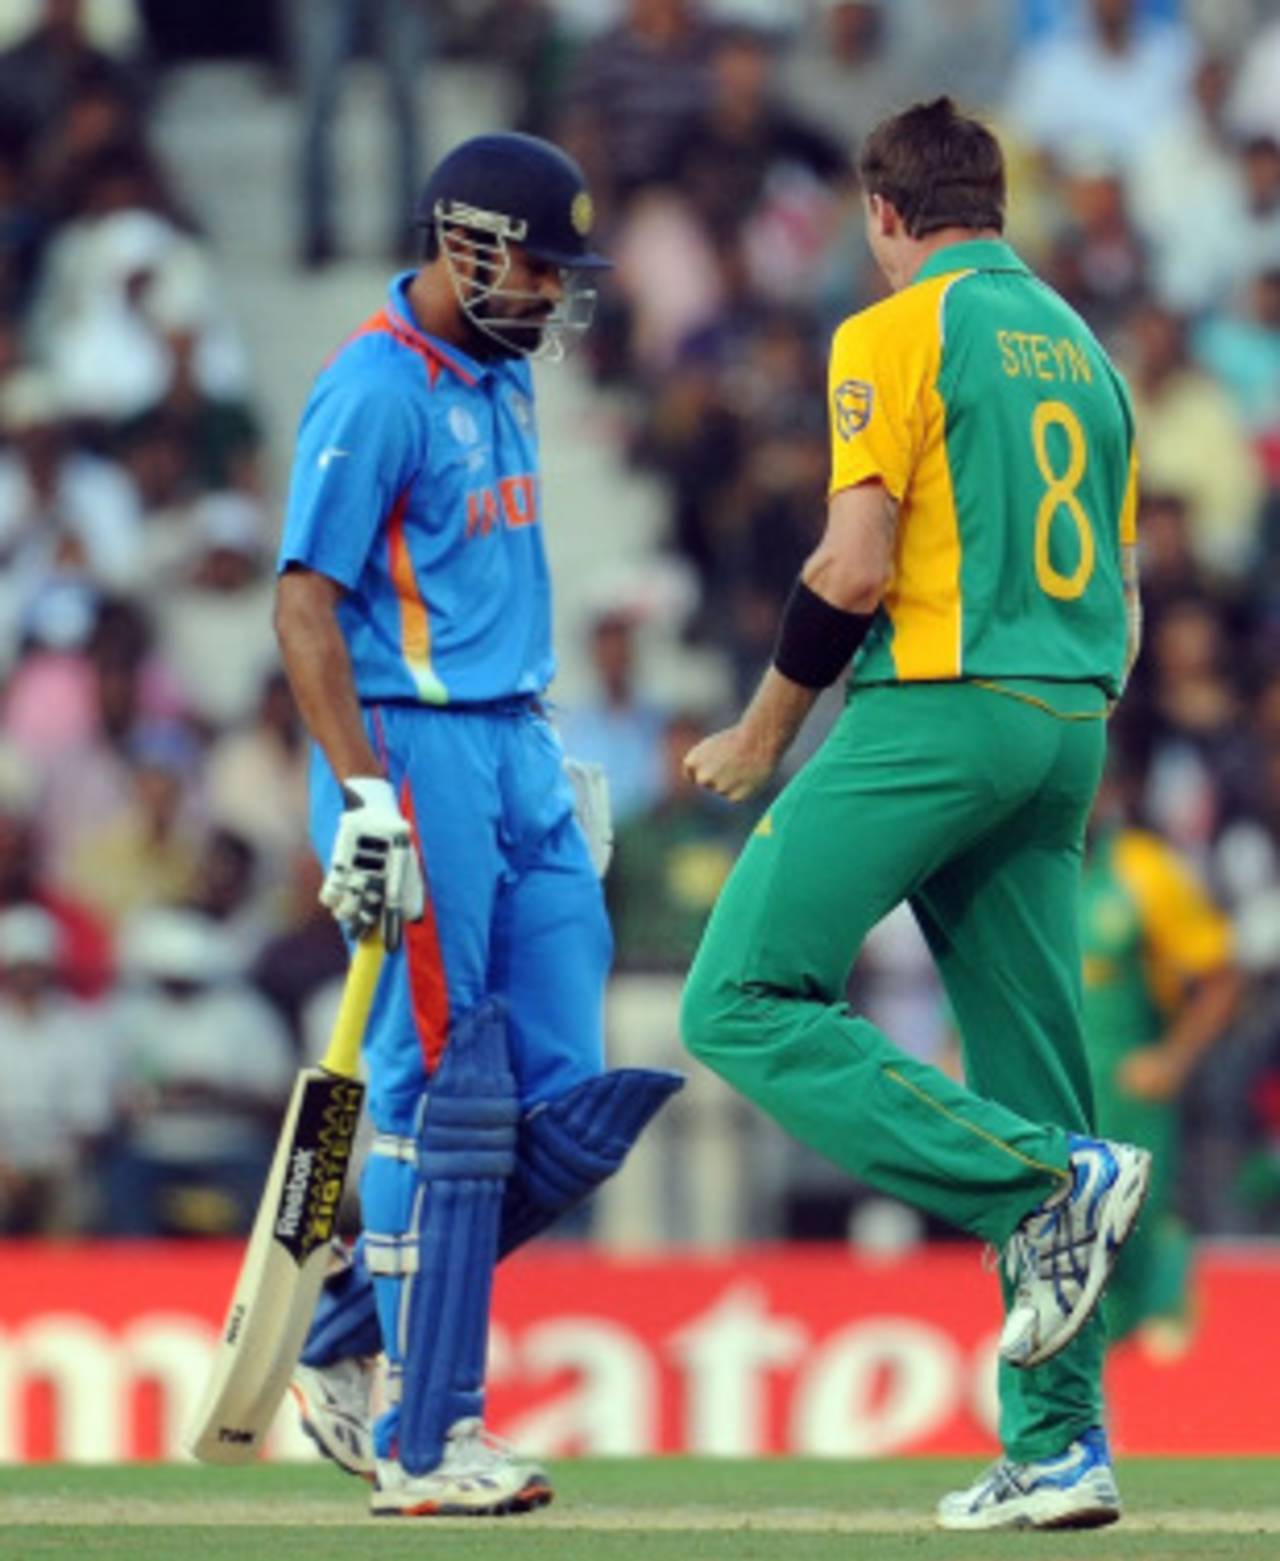 Dale Steyn is pumped after dismissing Yusuf Pathan for a duck, India v South Africa, Group B, World Cup, Nagpur, March 12, 2011